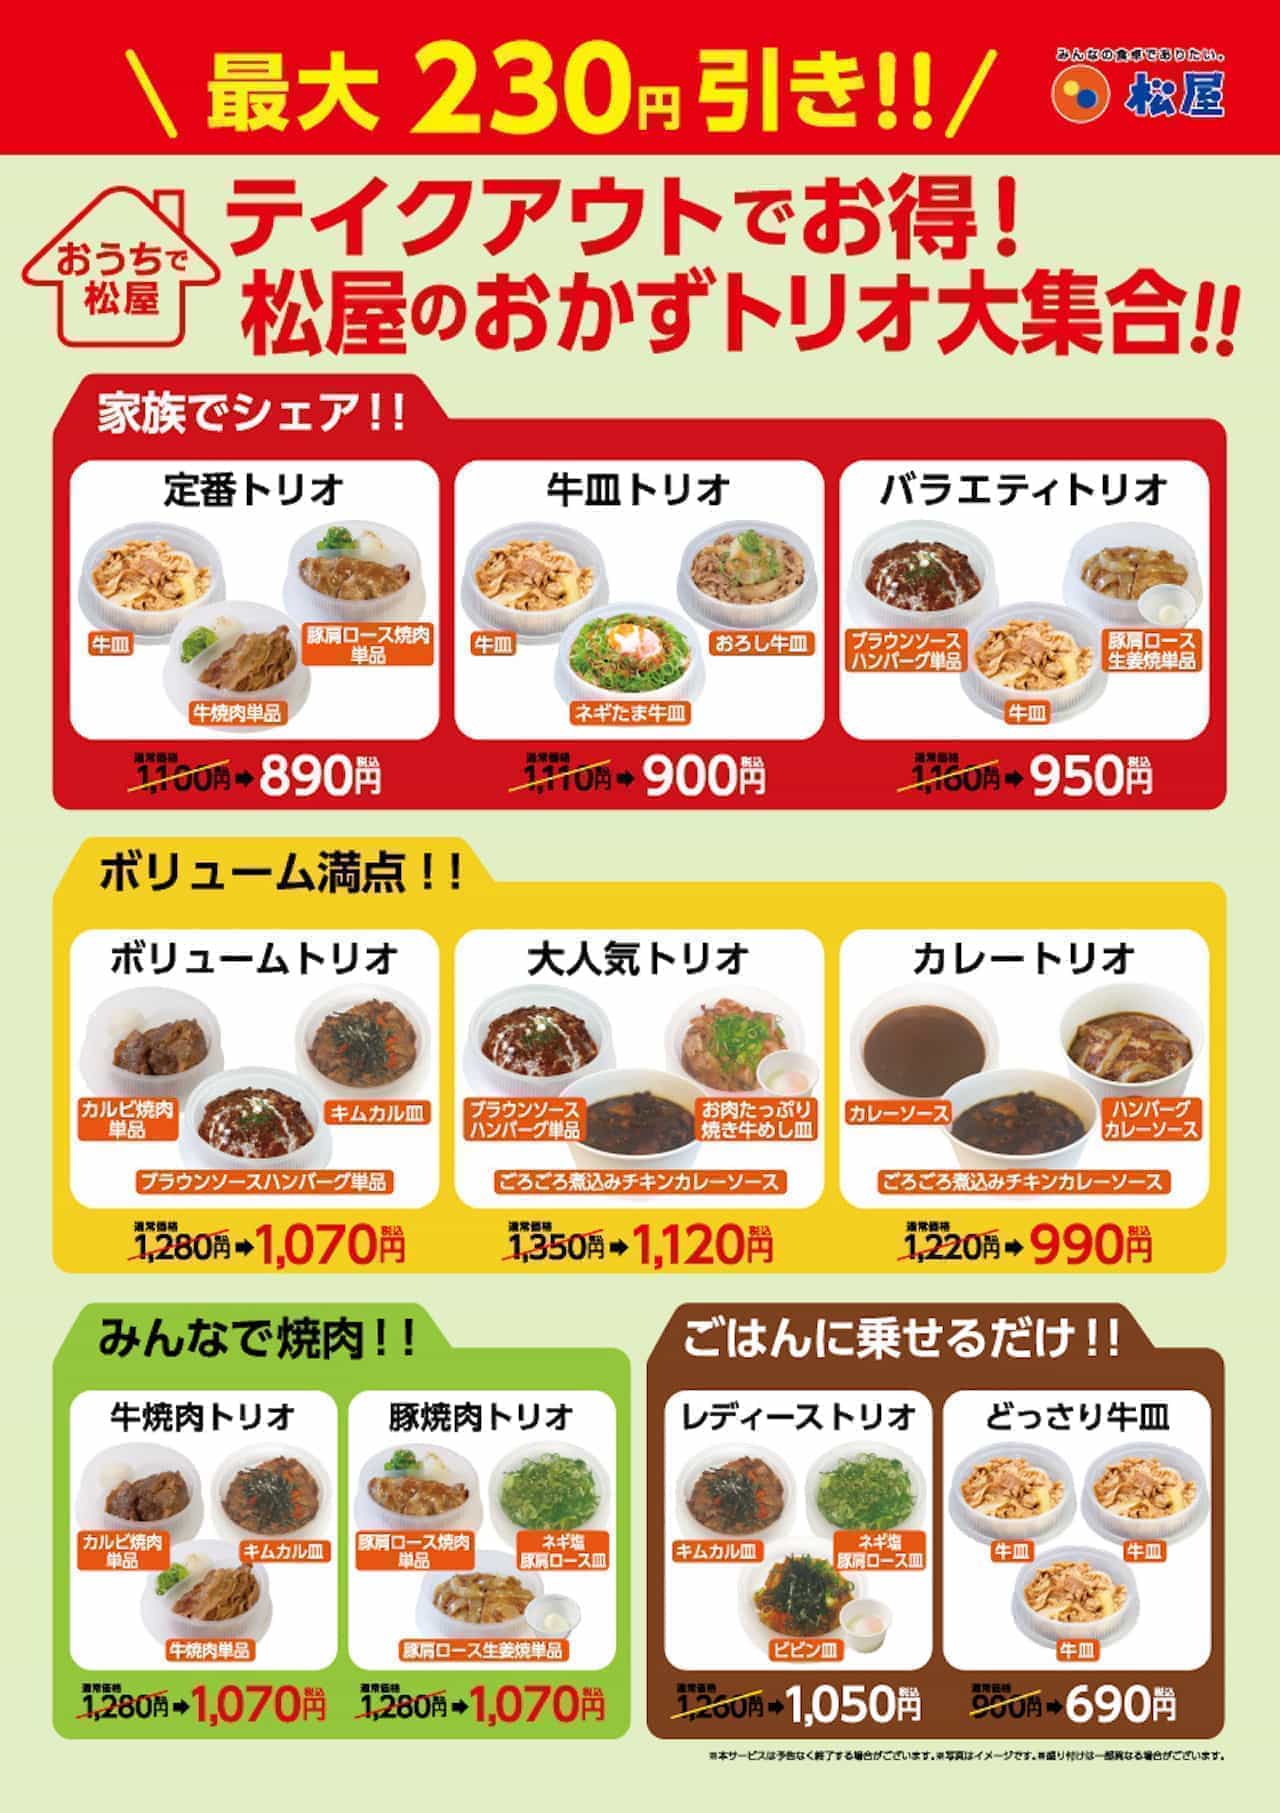 Matsuya's To go limited "side dish trio" campaign